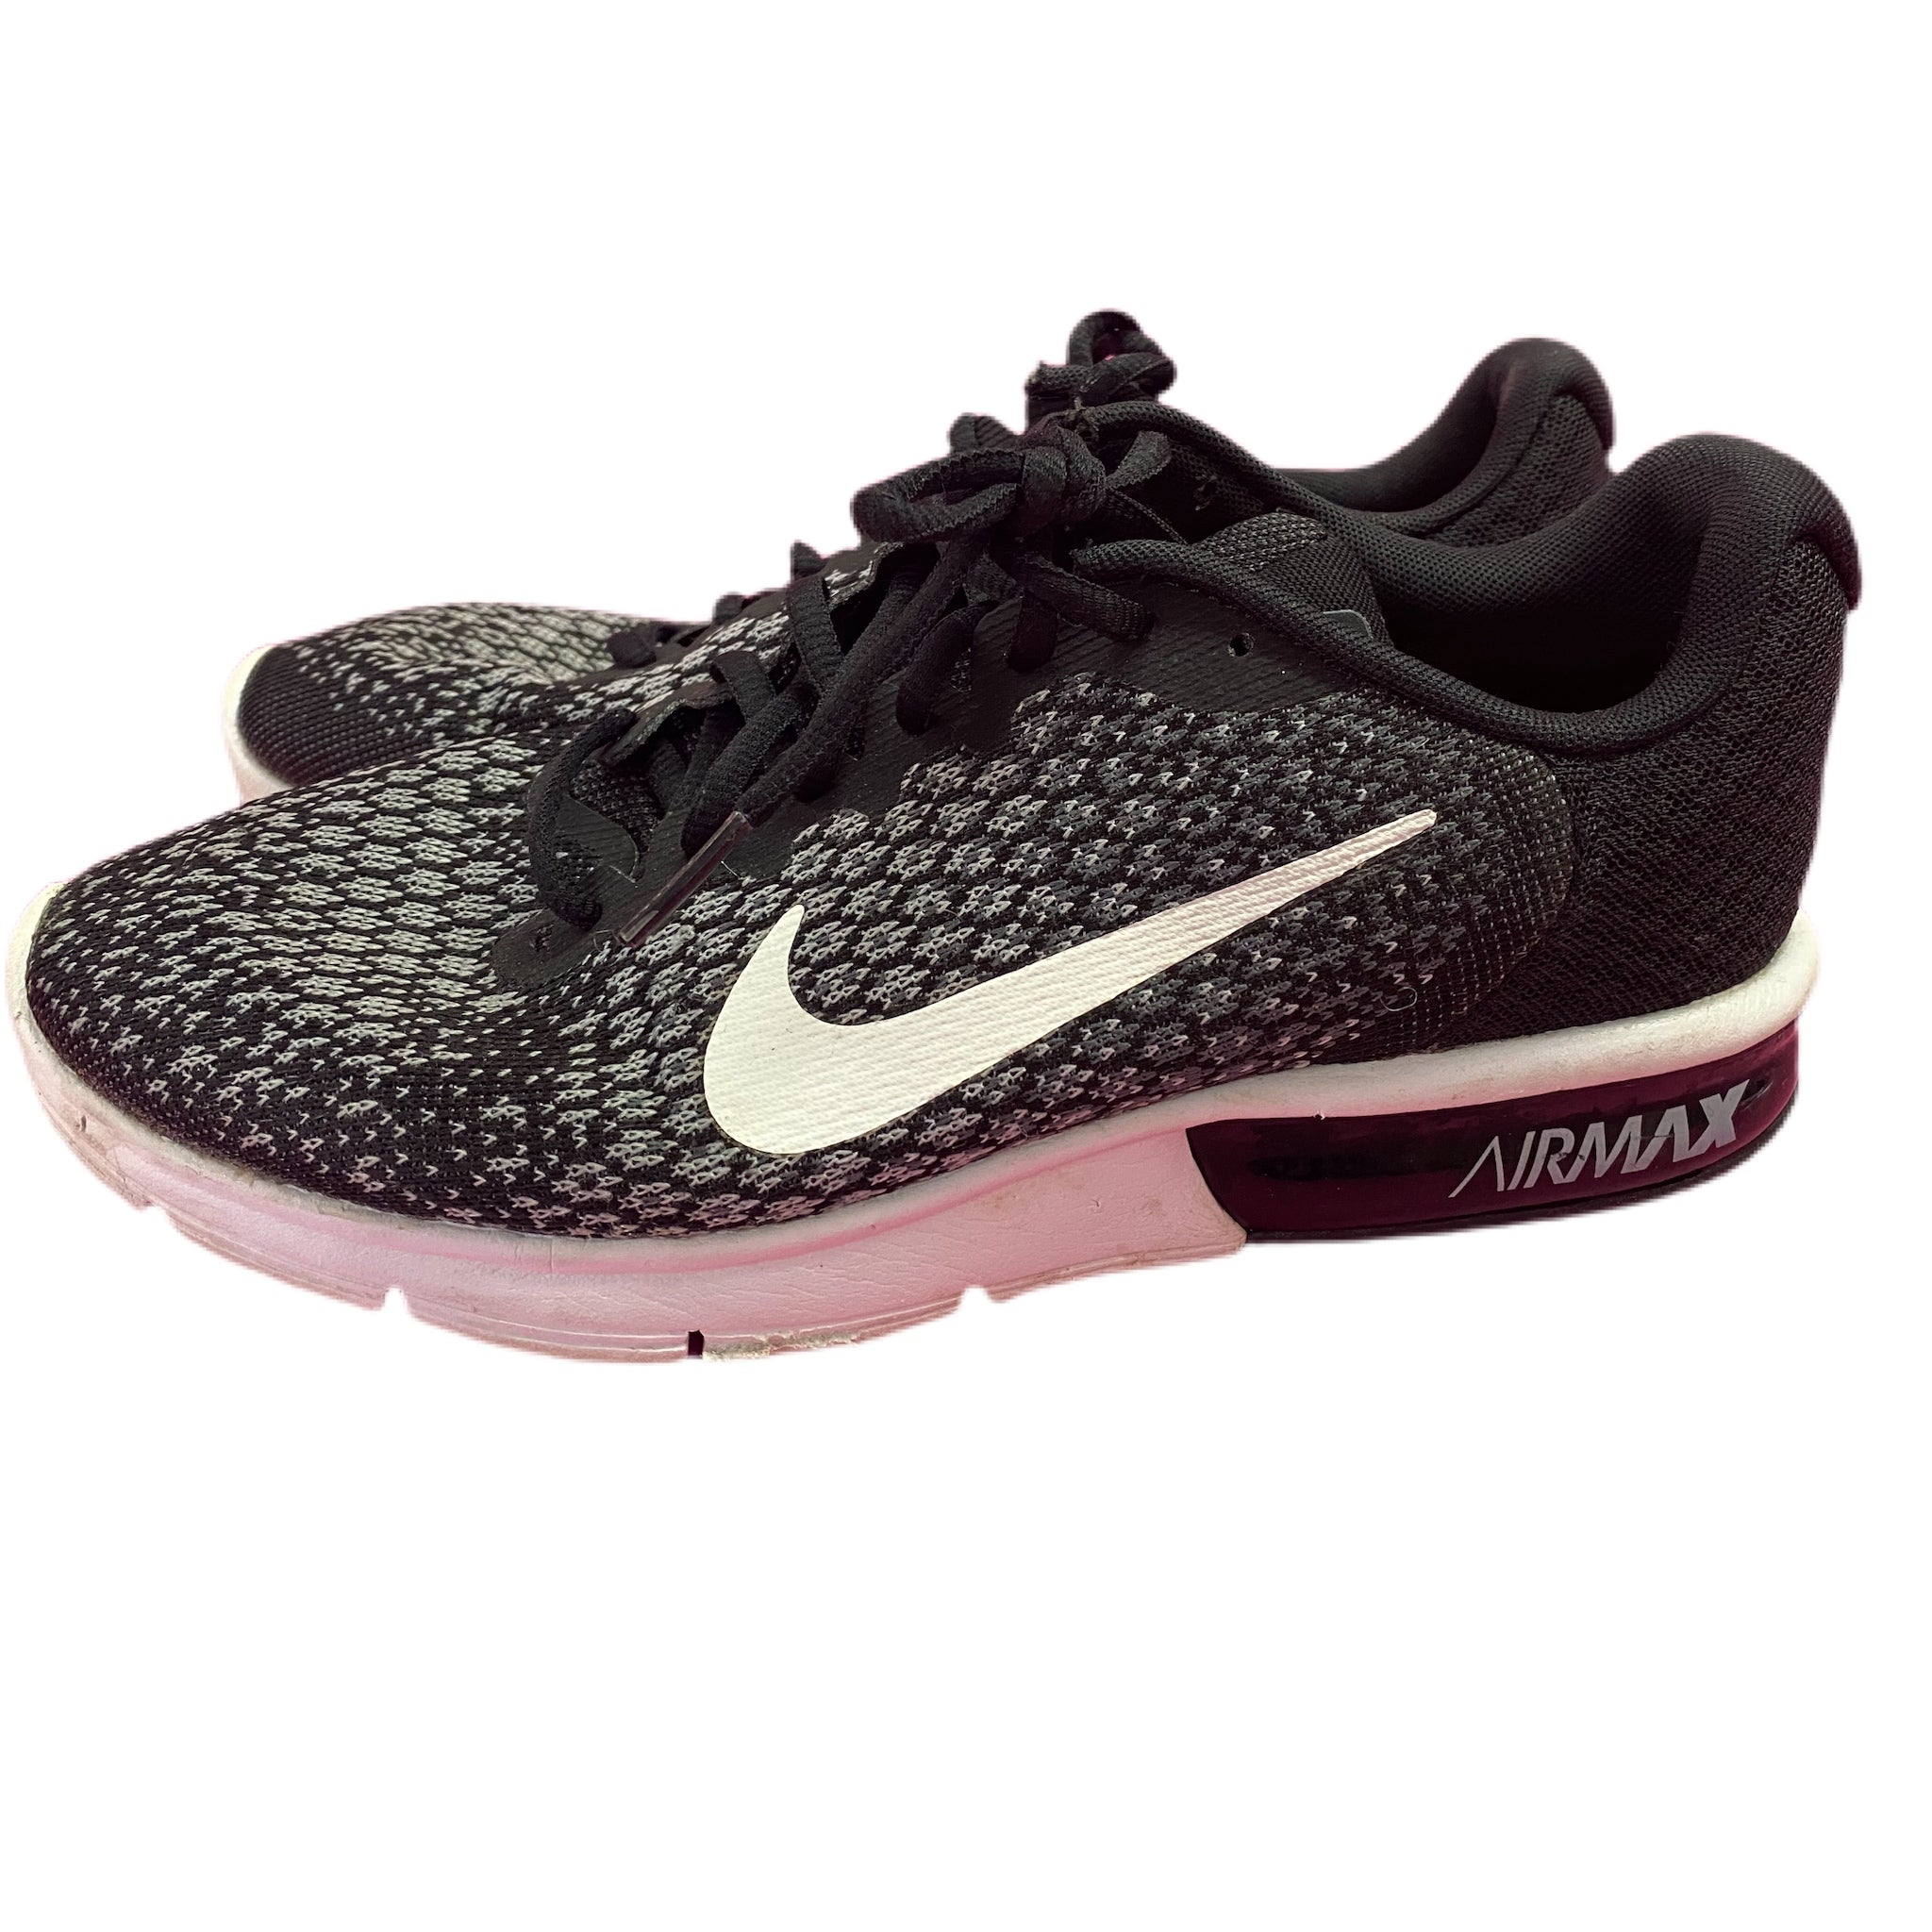 Costoso es suficiente Comprensión Nike Air Max Sequent 2 running sneakers shoes SIZE 10 852465-002